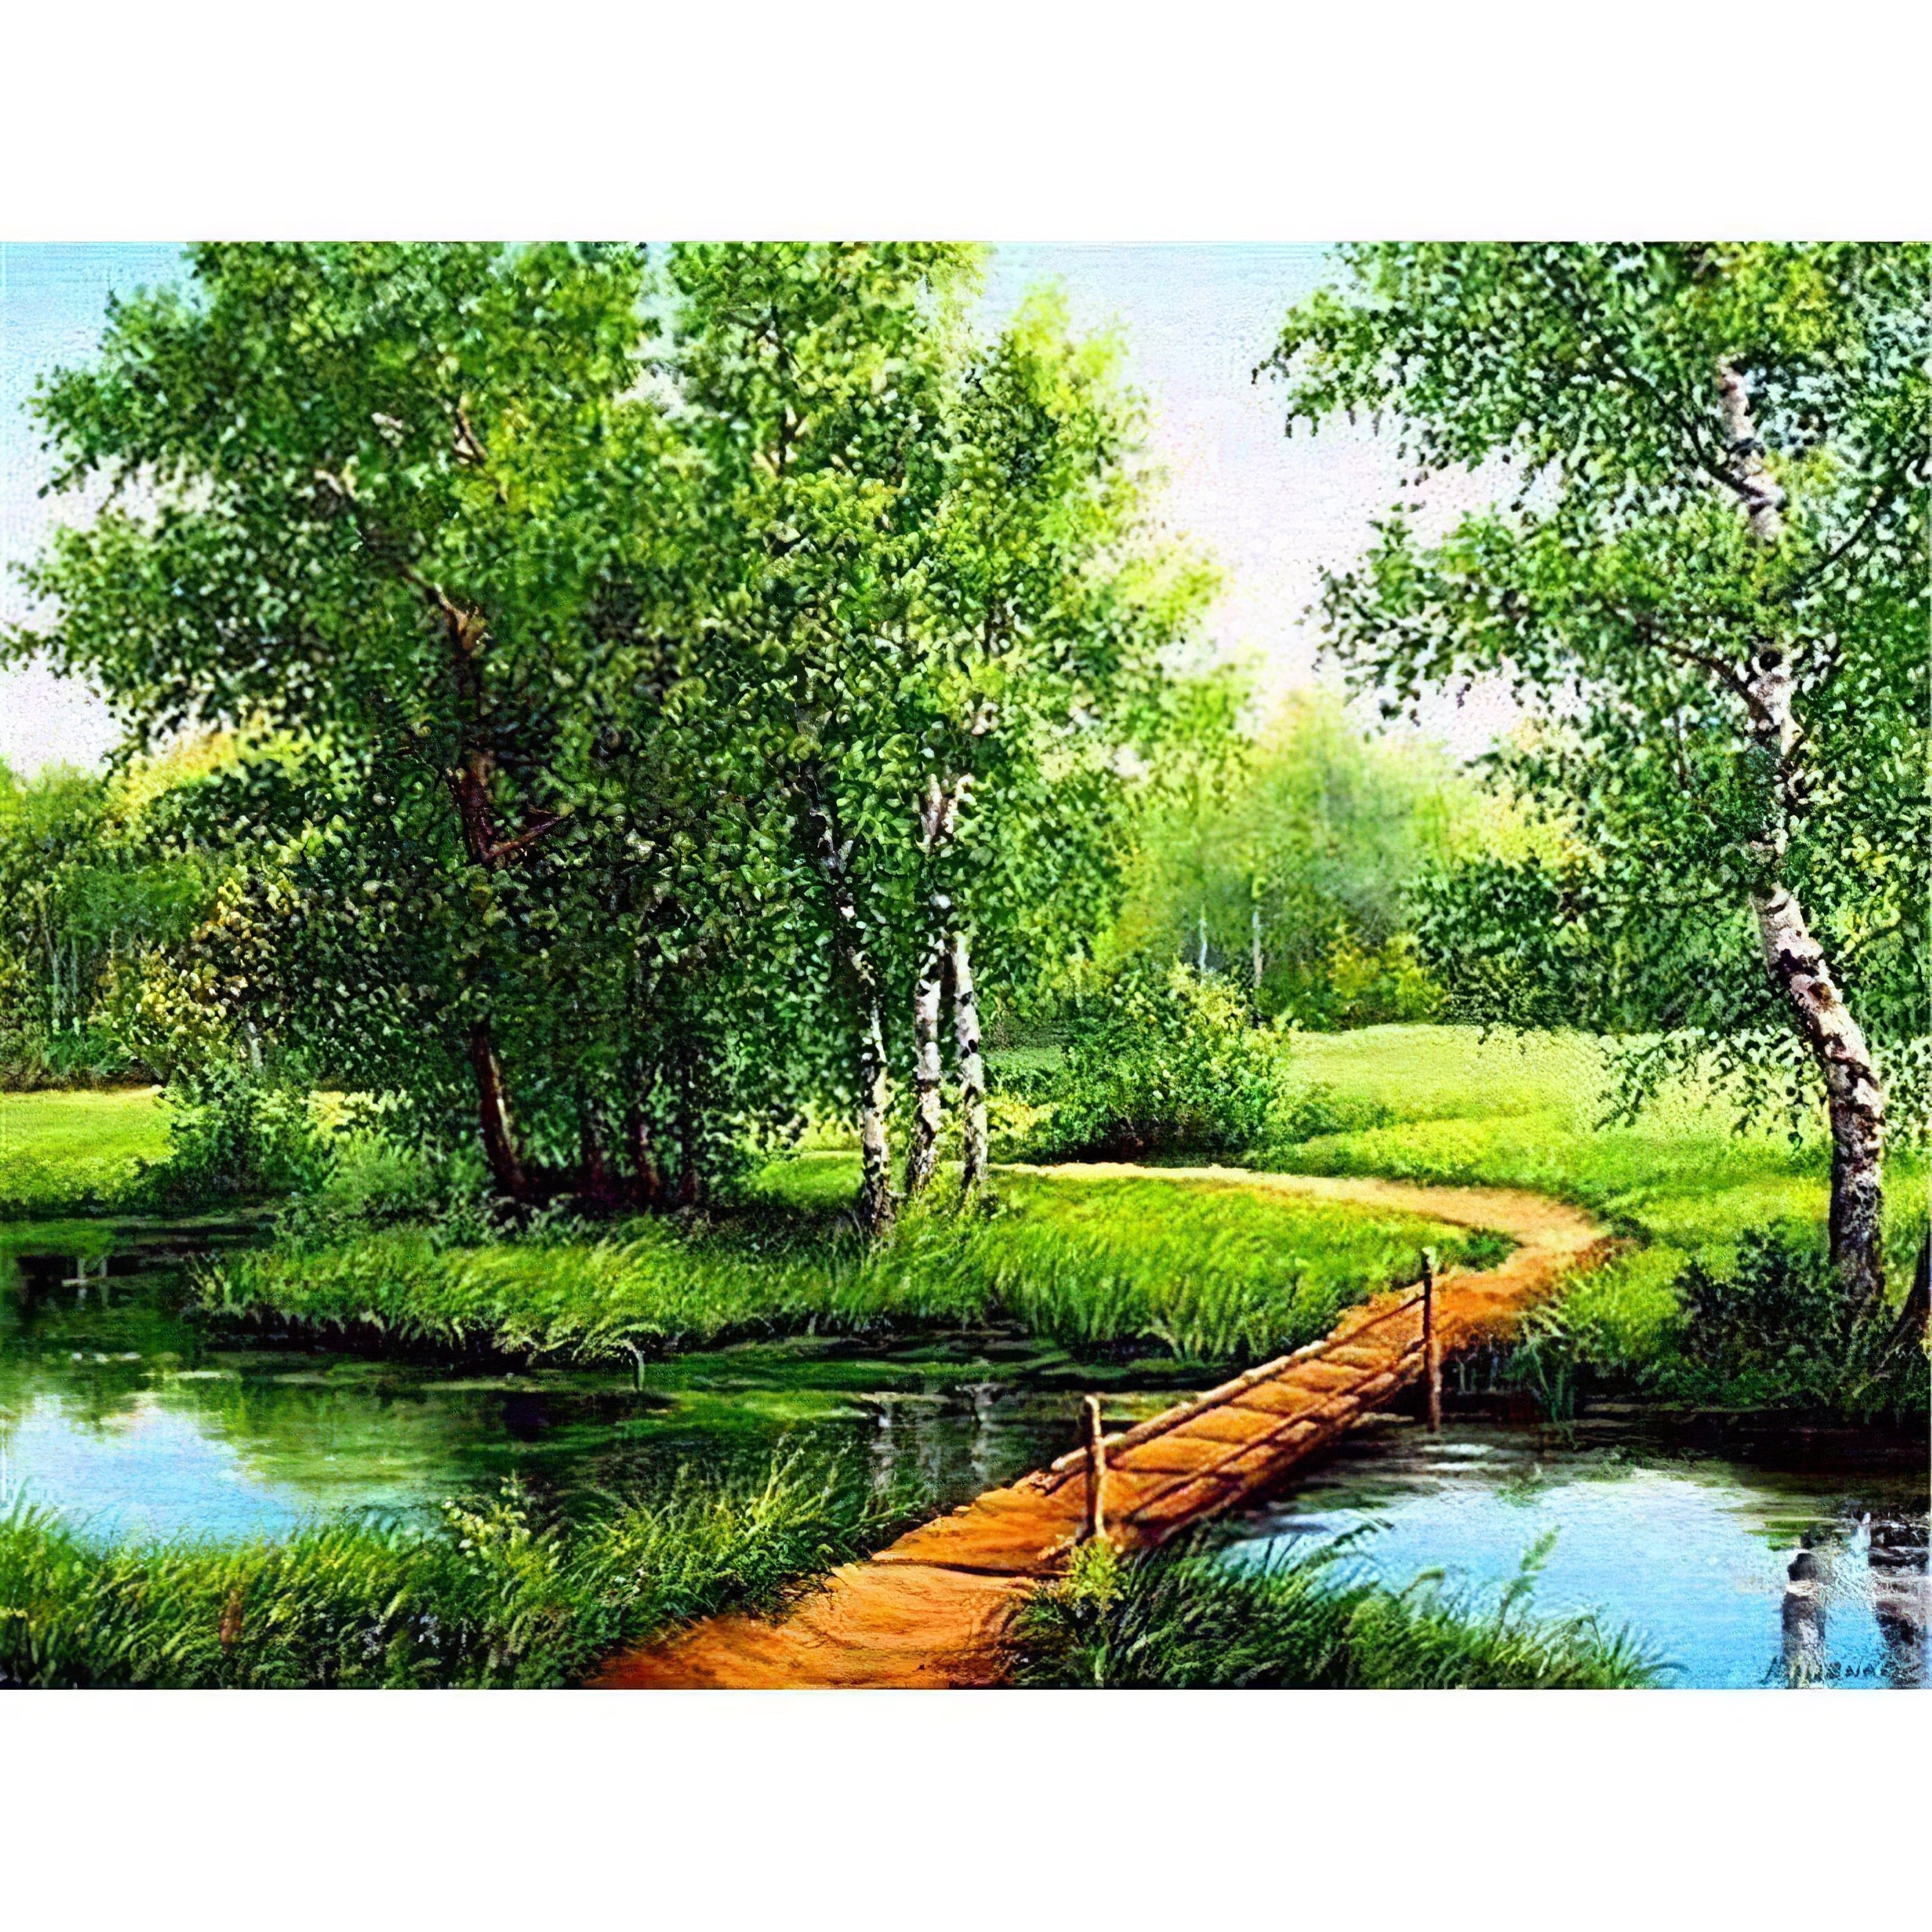 Diamond Painting - Small Bridge Over The Channel